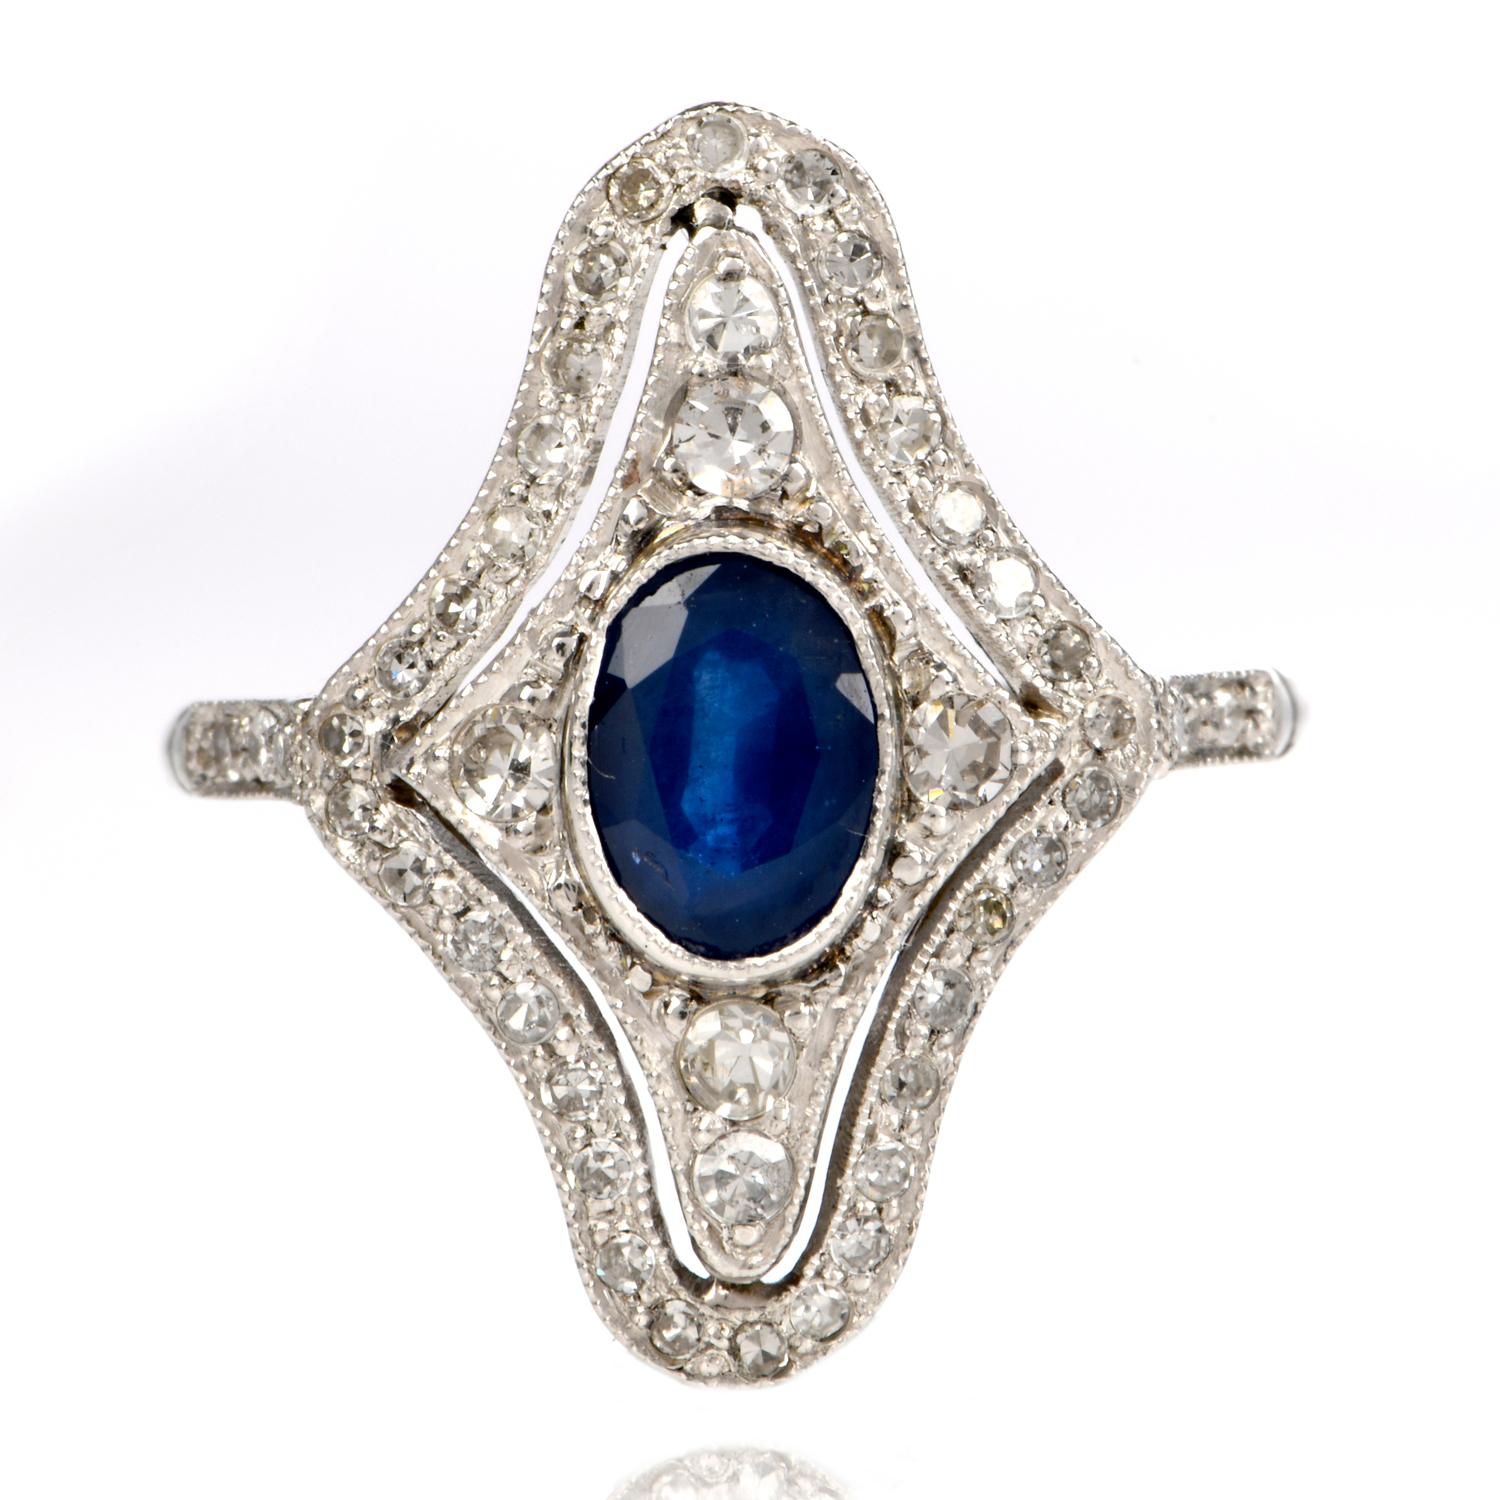 This Stylish Estate blue sapphire and diamond ring is crafted in platinum, weighing 3.7 grams and measuring 21 mm wide. Designed as a stylized lozenge plaque, this classically and timelessly elegant ring is centered with a 0.90 carat oval-cut blue